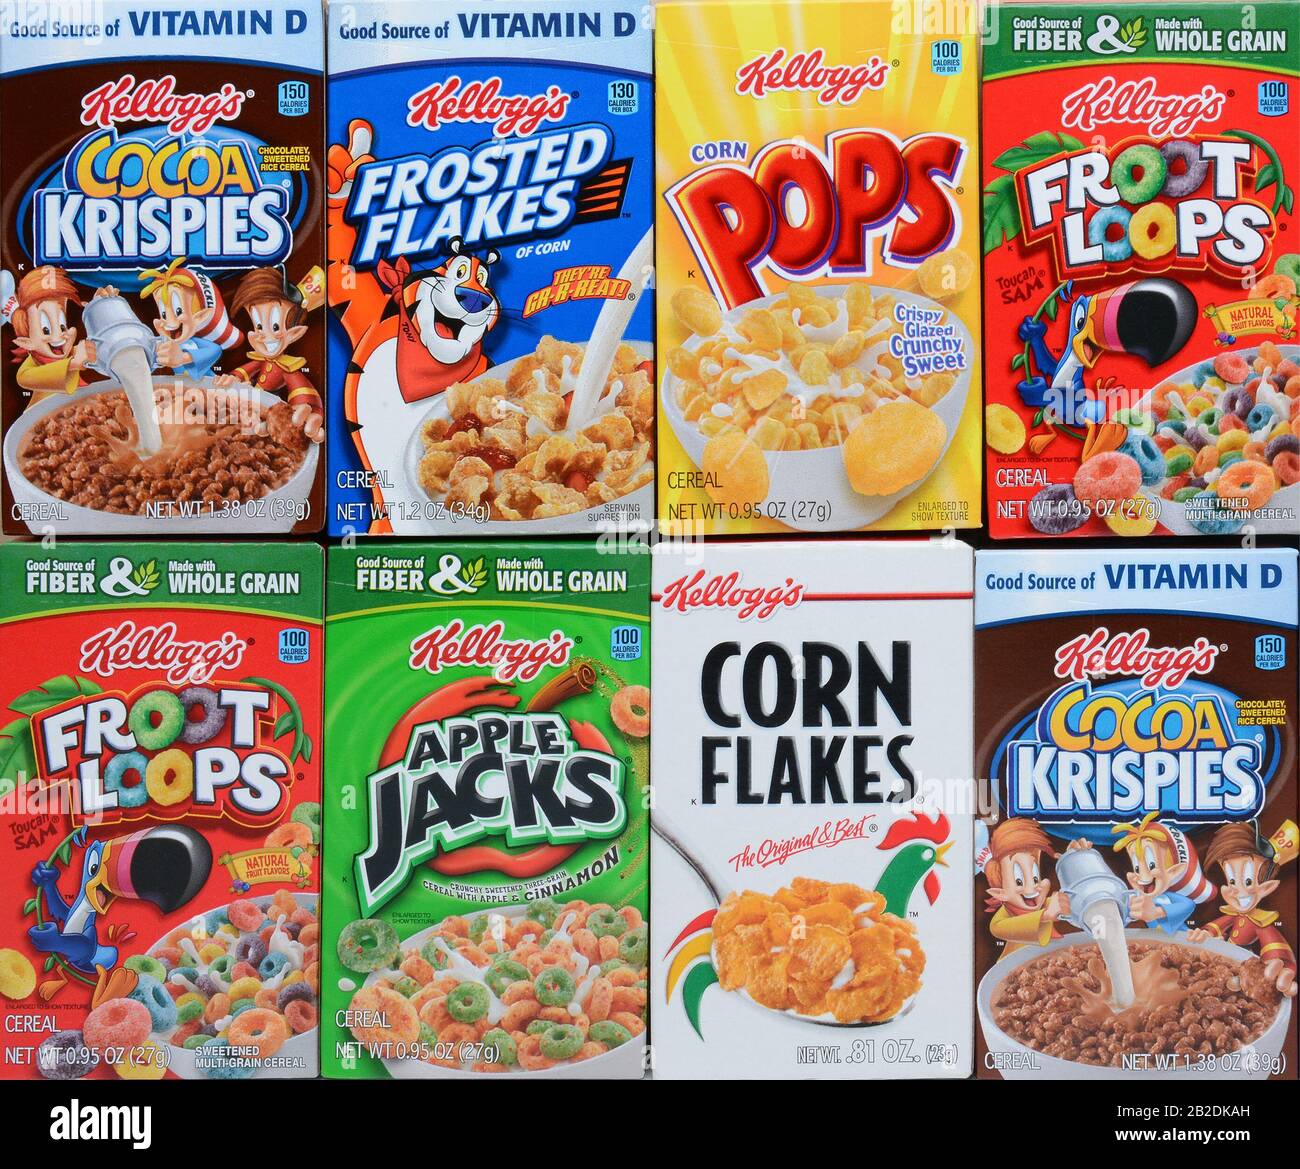 https://c8.alamy.com/comp/2B2DKAH/irvine-california-march-15-2015-kelloggs-cereal-boxes-a-variety-of-kelloggs-single-serving-boxes-the-battle-creek-michigan-company-is-a-lead-2B2DKAH.jpg